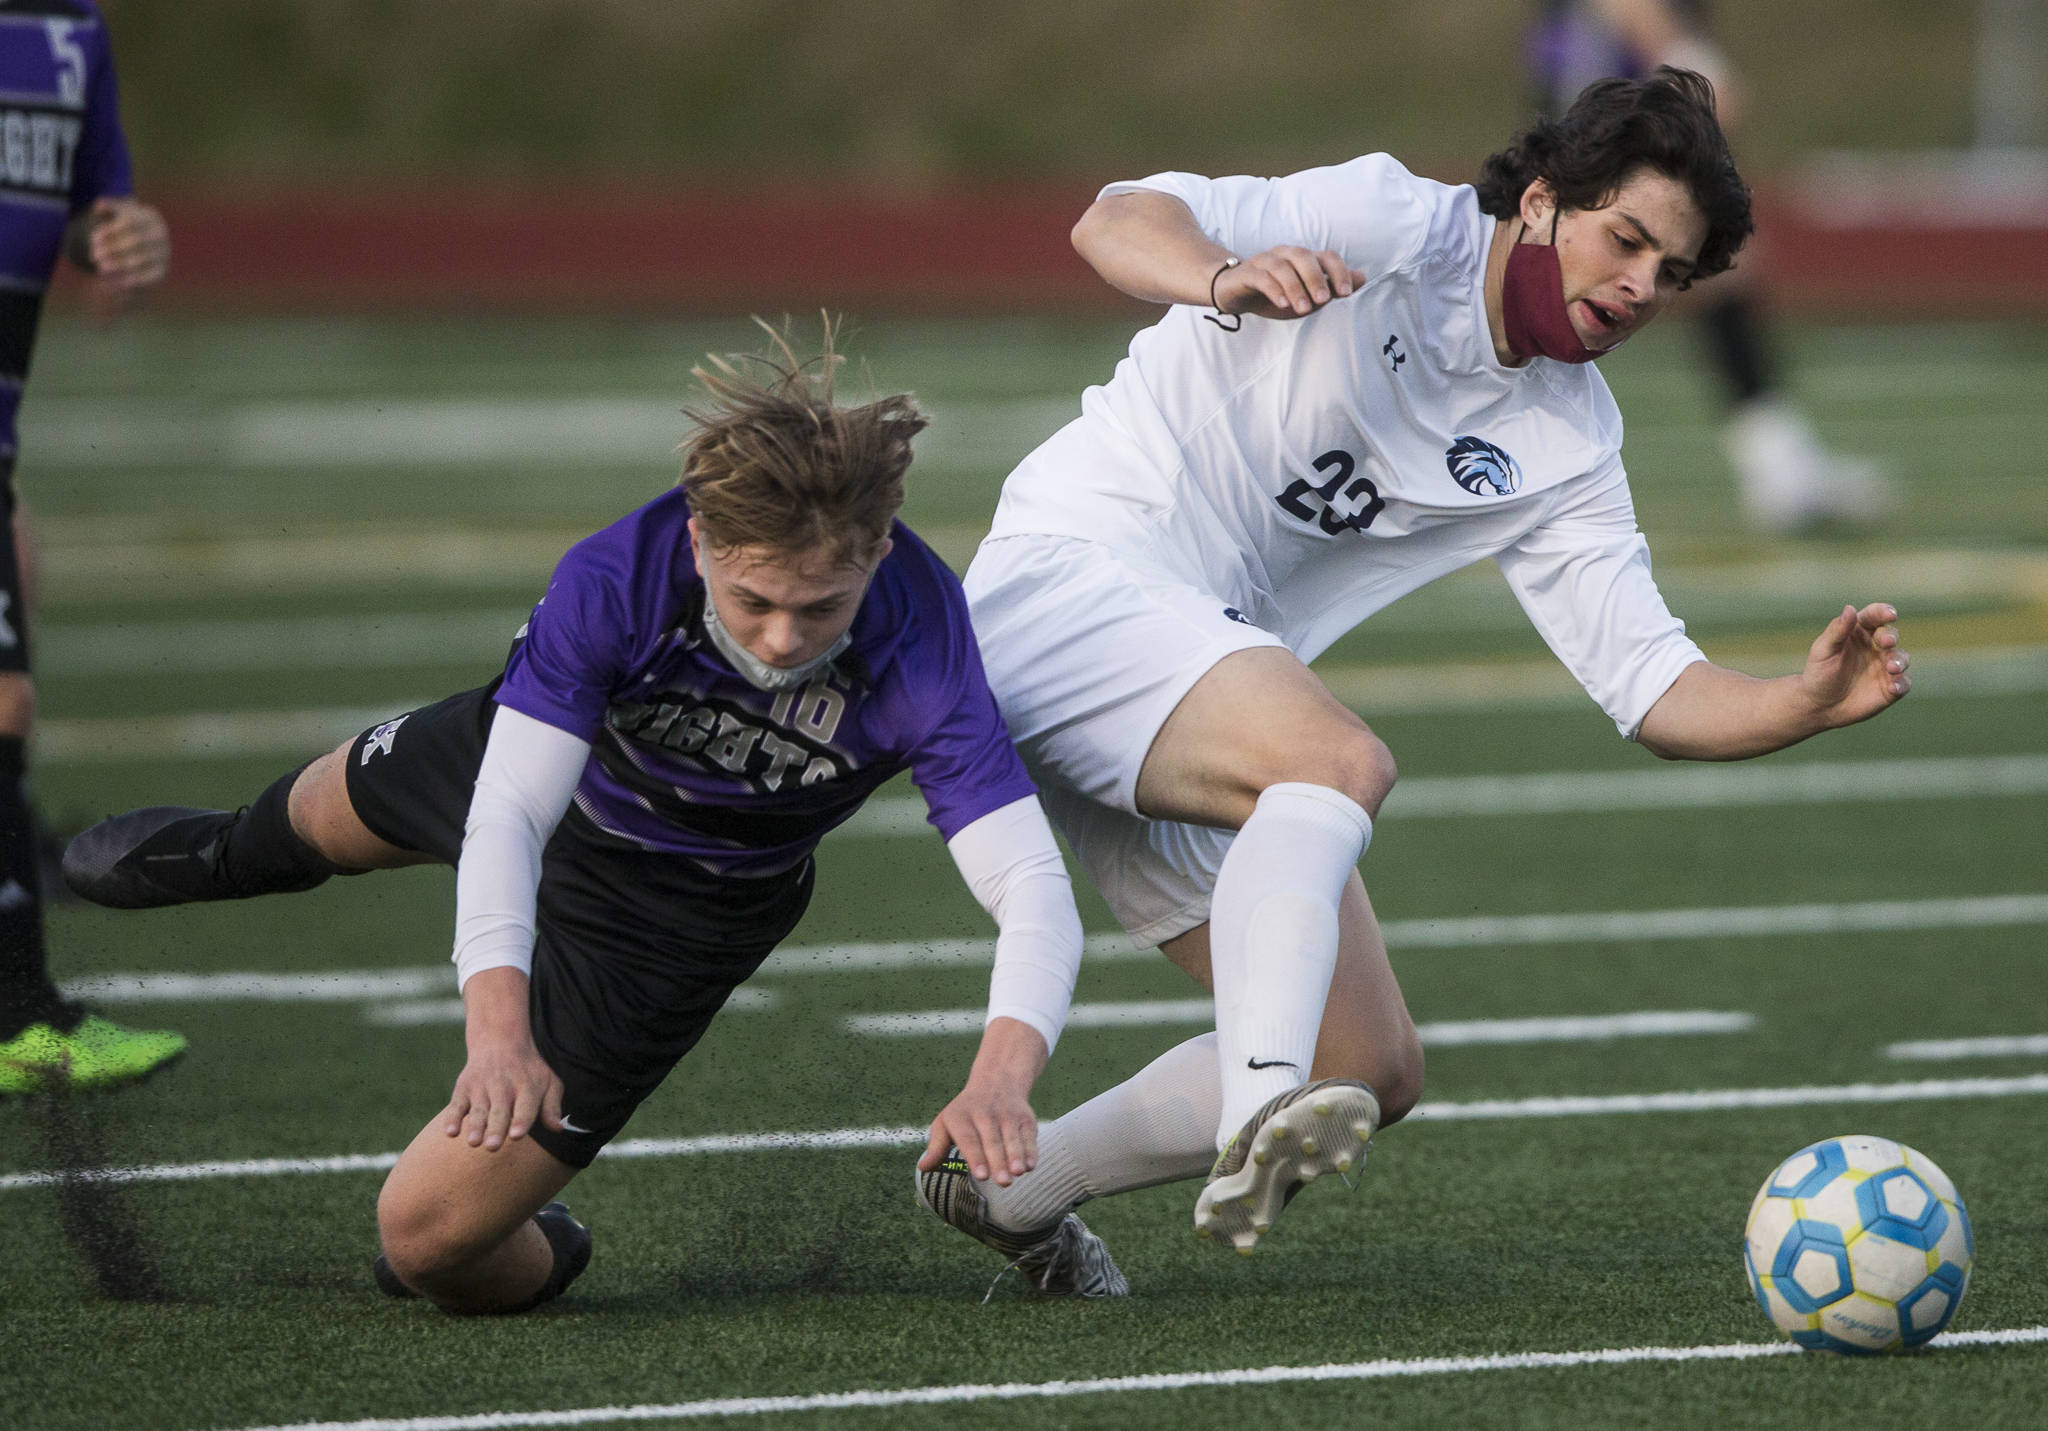 Meadowdale senior River Stewart (right) was named to The Herald’s All-Area boys soccer first team. (Olivia Vanni / The Herald)